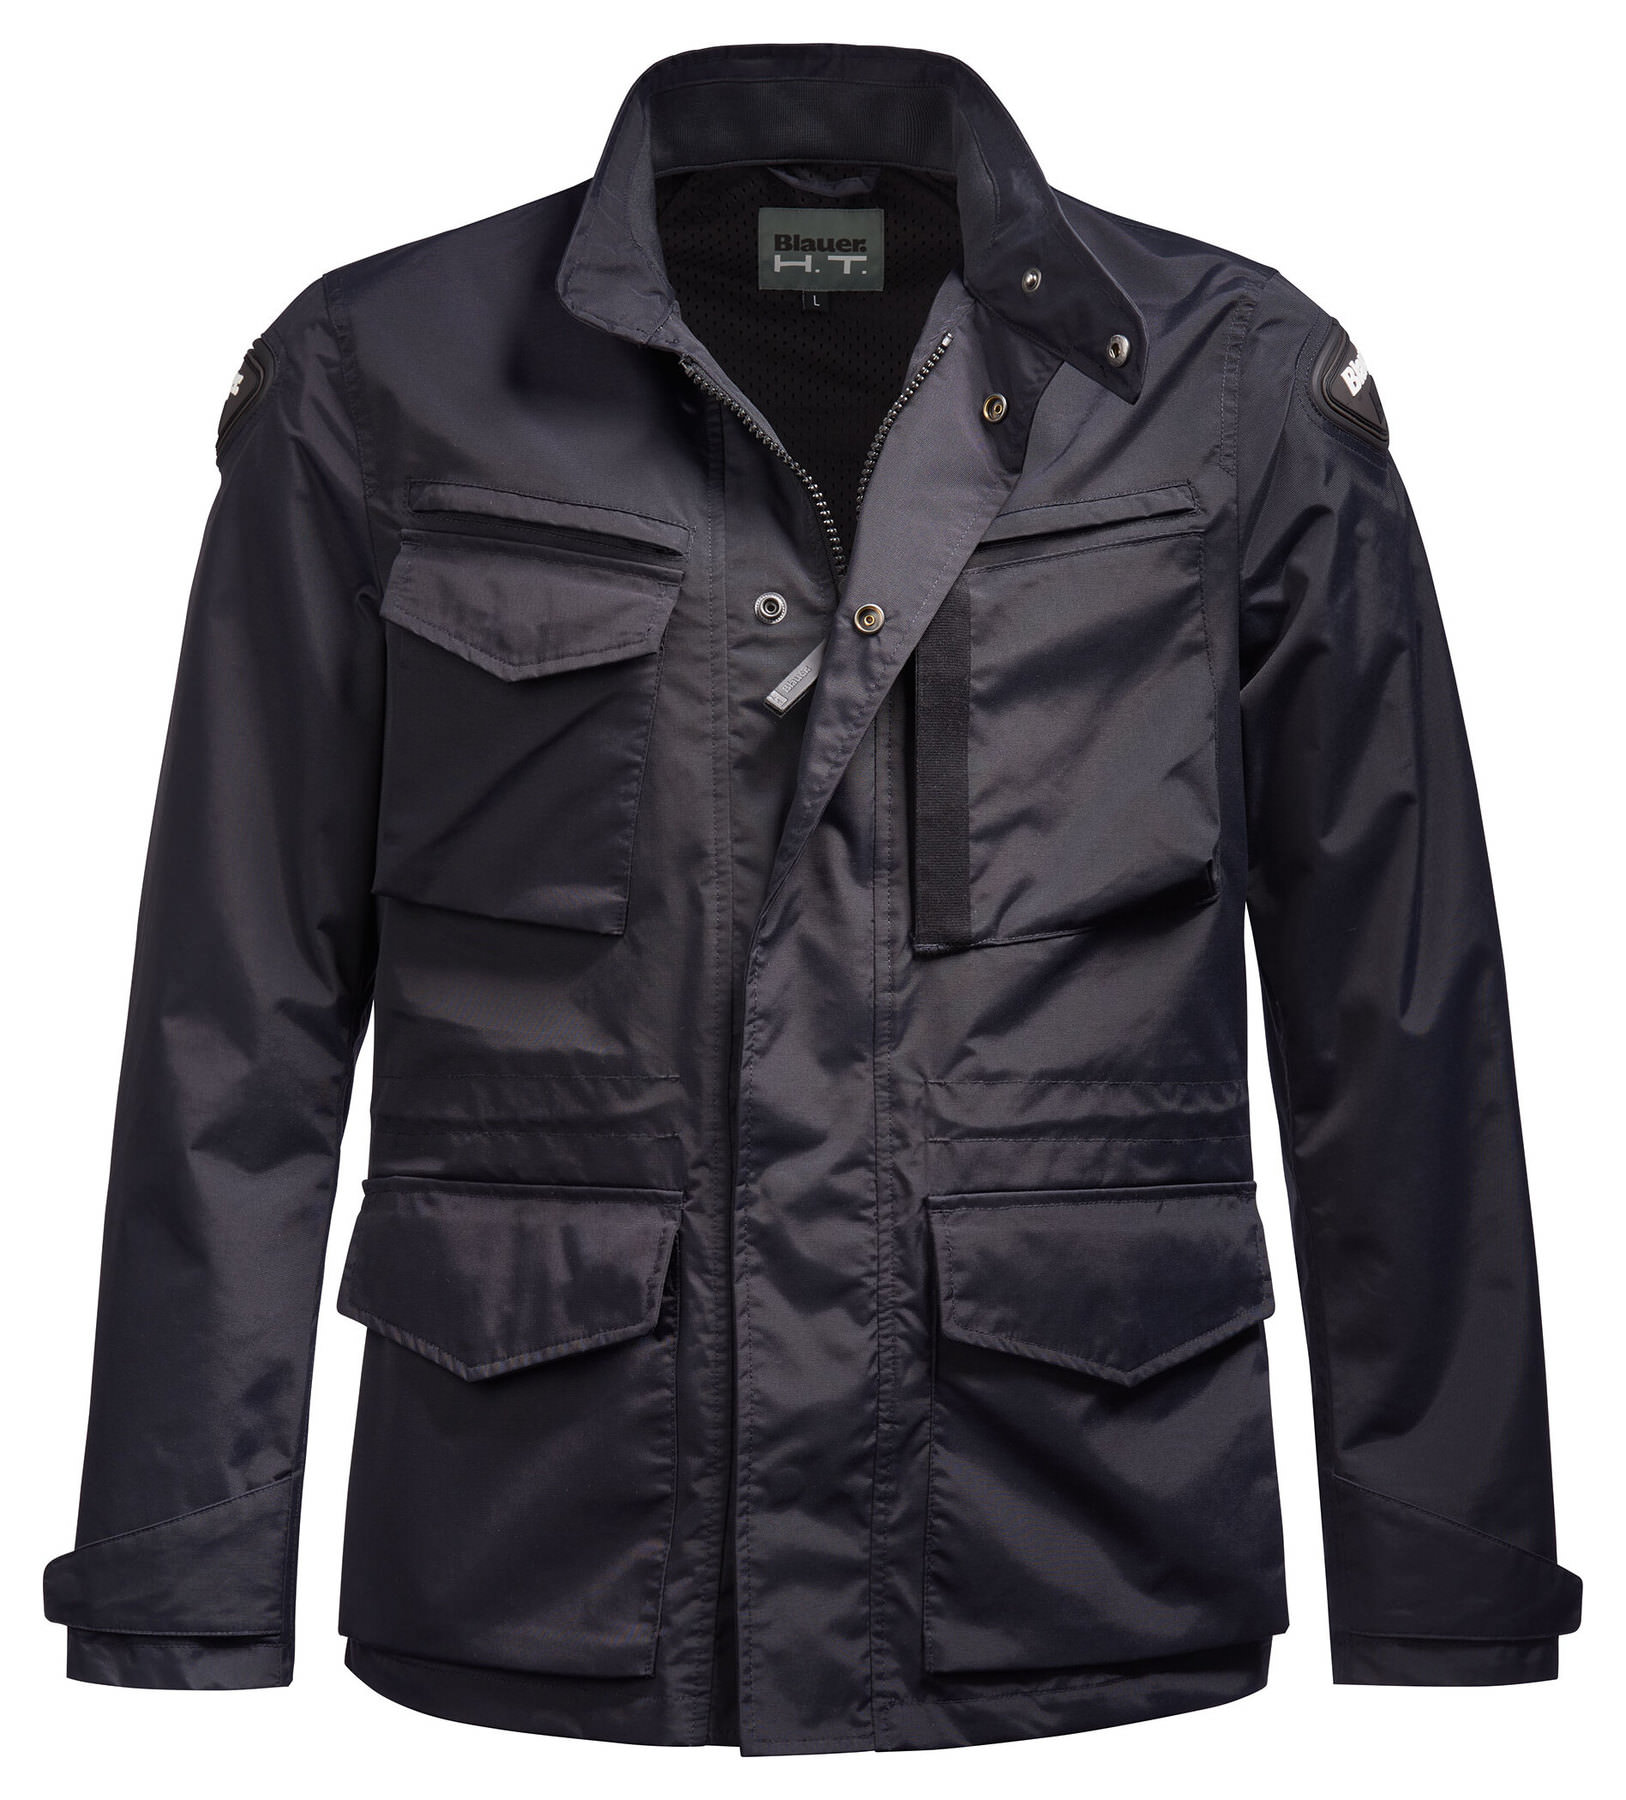 Buy Blauer Ethan mens textile jacket | Louis motorcycle clothing and ...